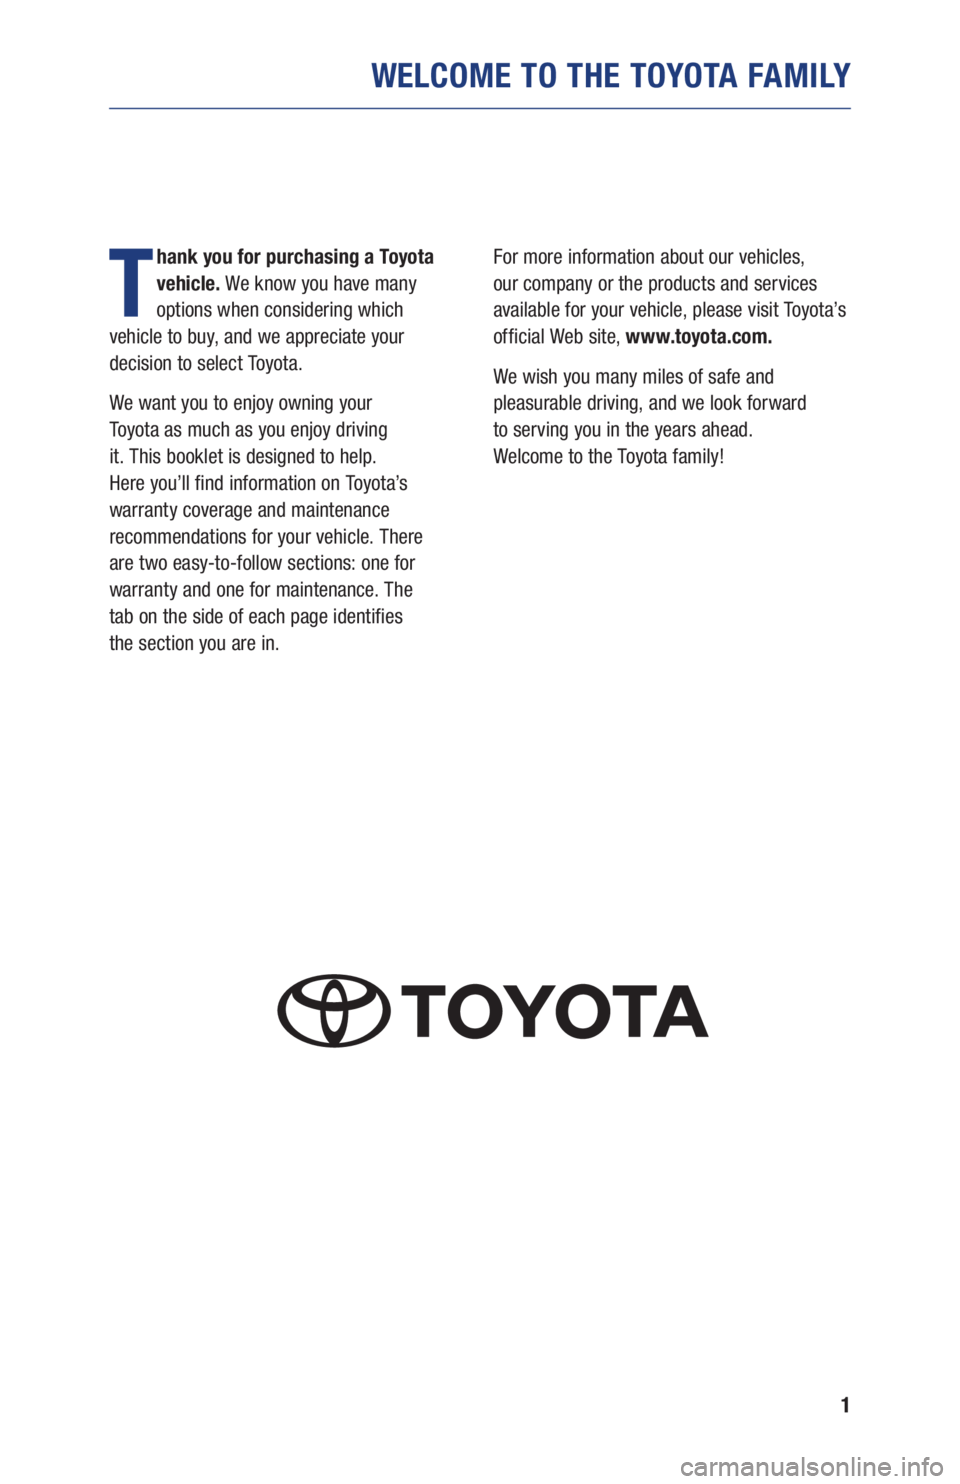 TOYOTA C-HR 2019  Warranties & Maintenance Guides (in English) 1
WELCOME TO THE TOYOTA FAMILY
T
hank you for purchasing a Toyota 
vehicle. We know you have many 
options when considering which  
vehicle to buy, and we appreciate your 
decision to select Toyota.
W